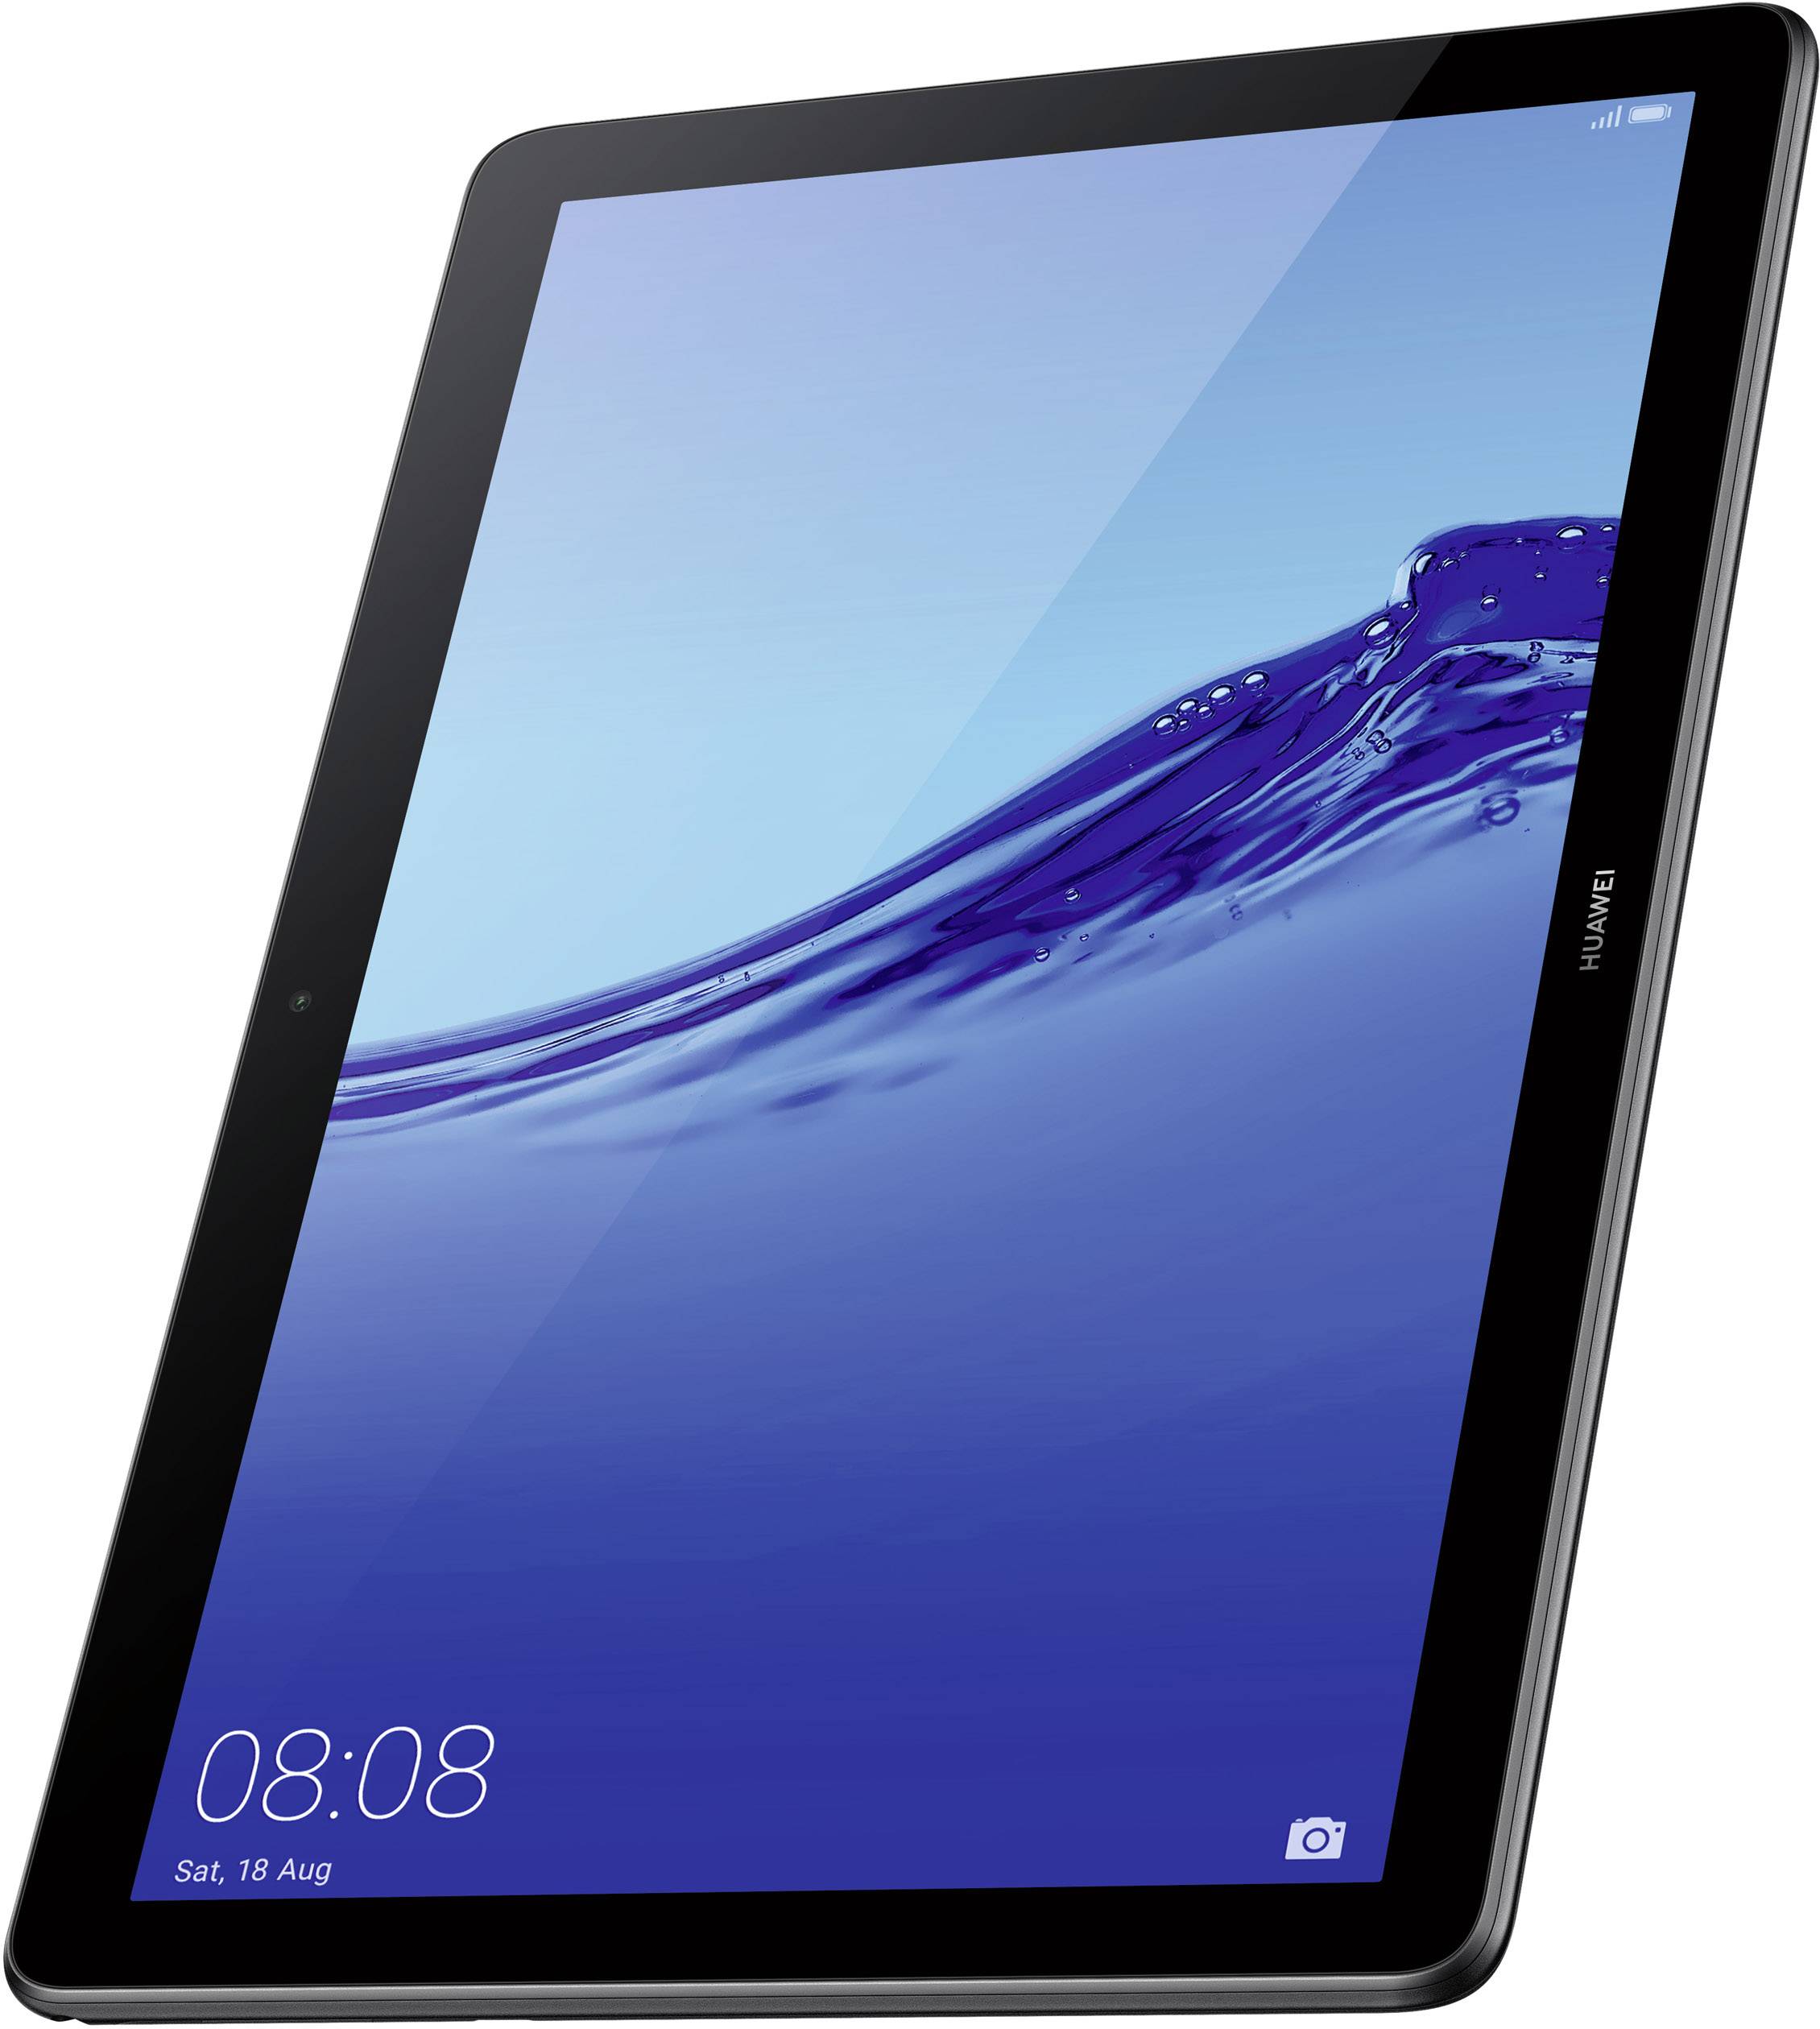 HUAWEIMediapad T5;Tablet Android25.7 cm(10.1 pollici ) 32 GB;WiFiNero1